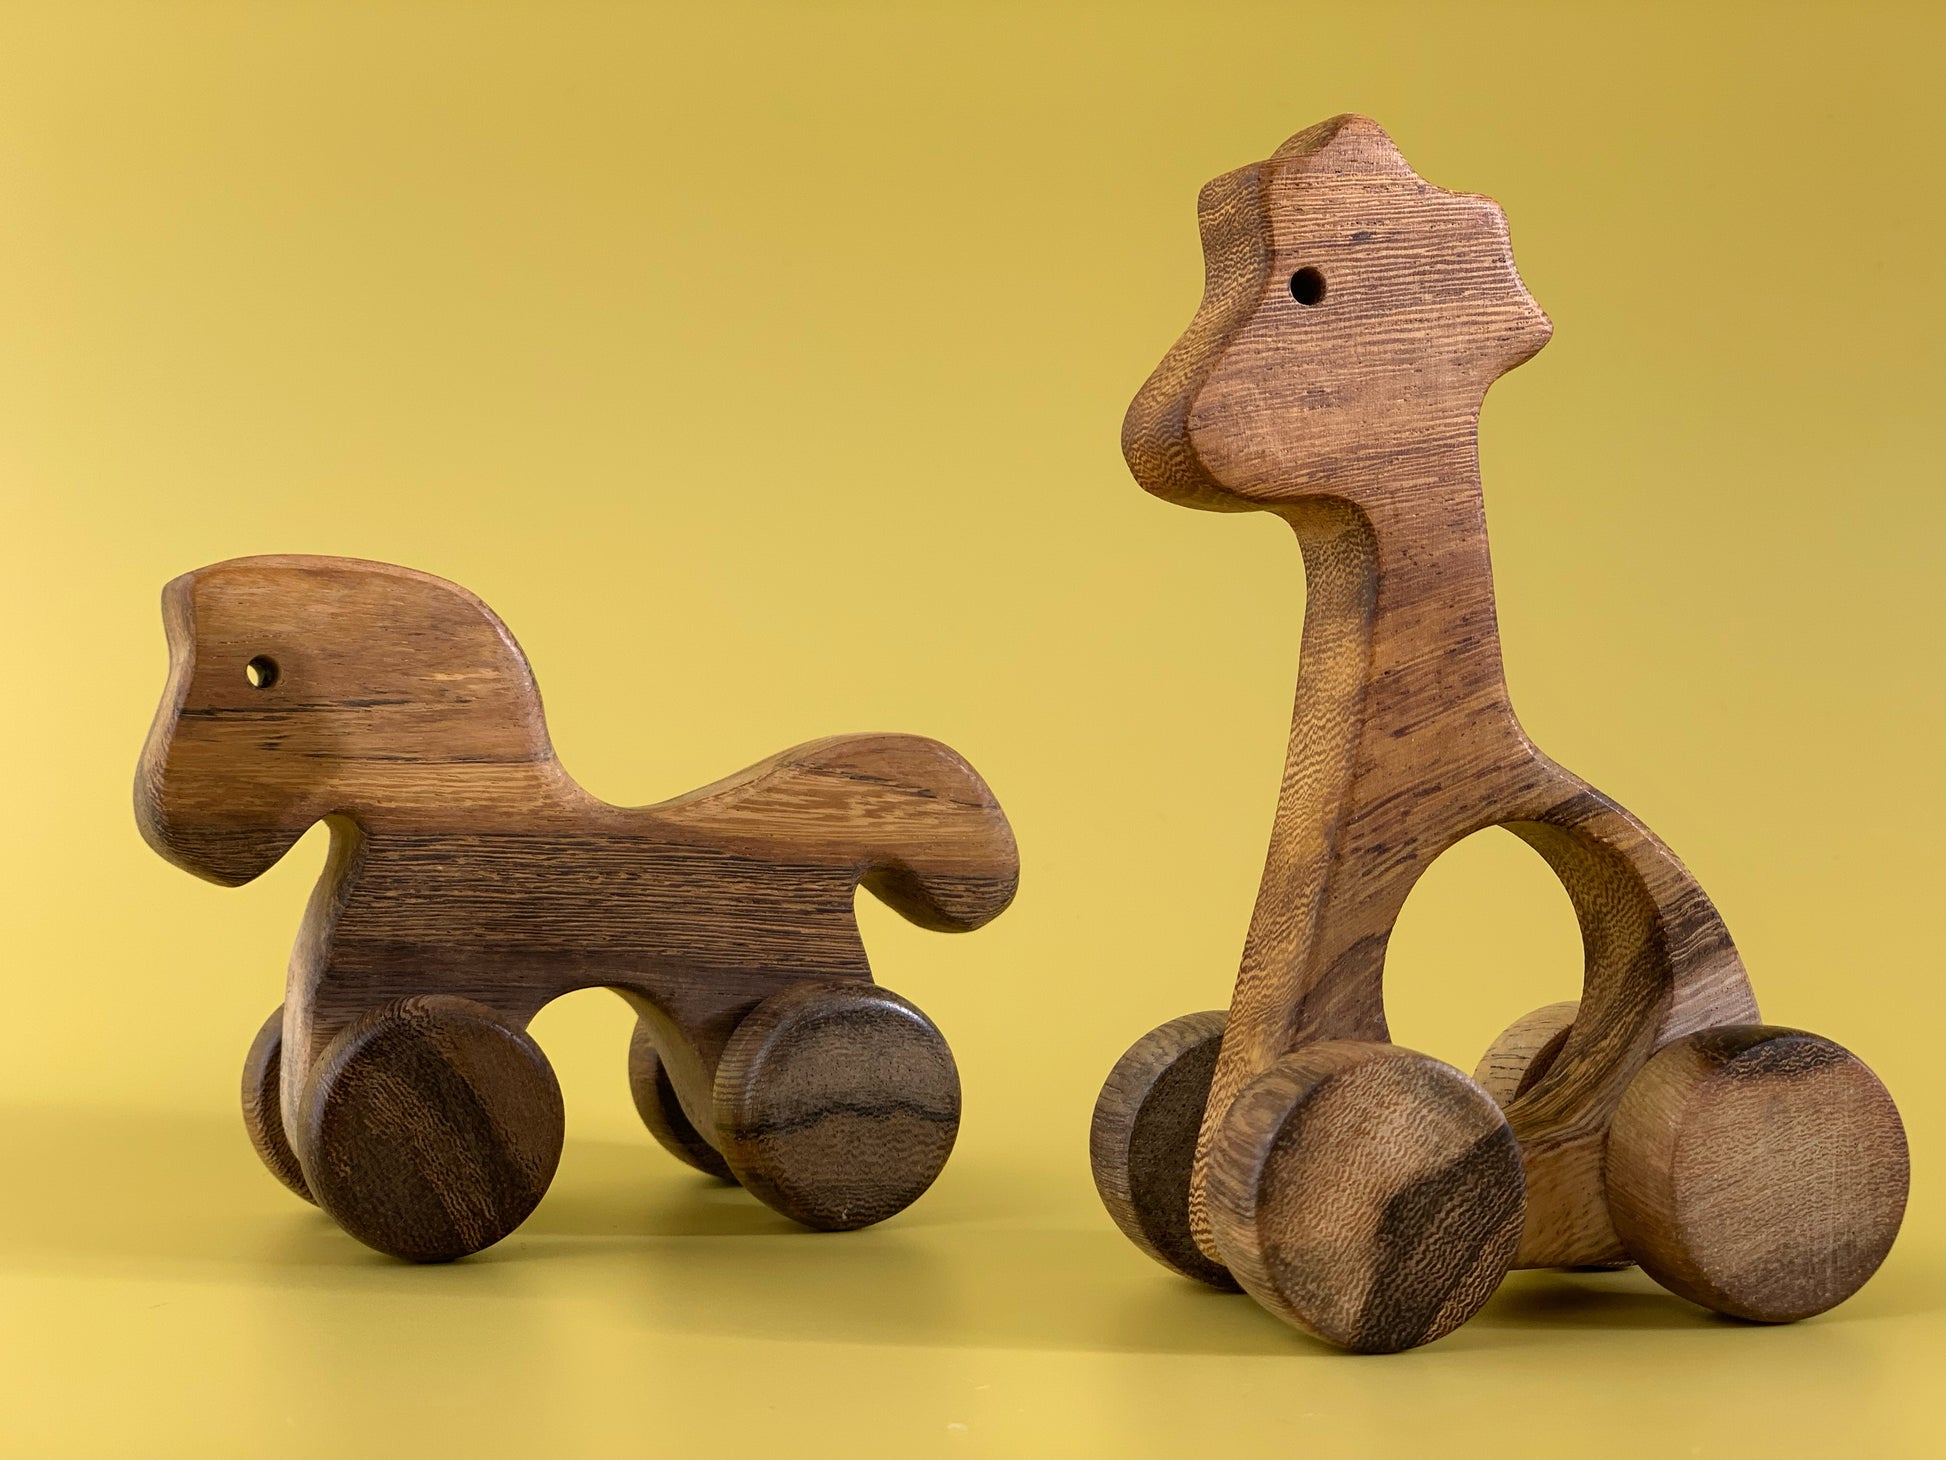 Wooden Baby Horse on Wheels - My first wooden toy